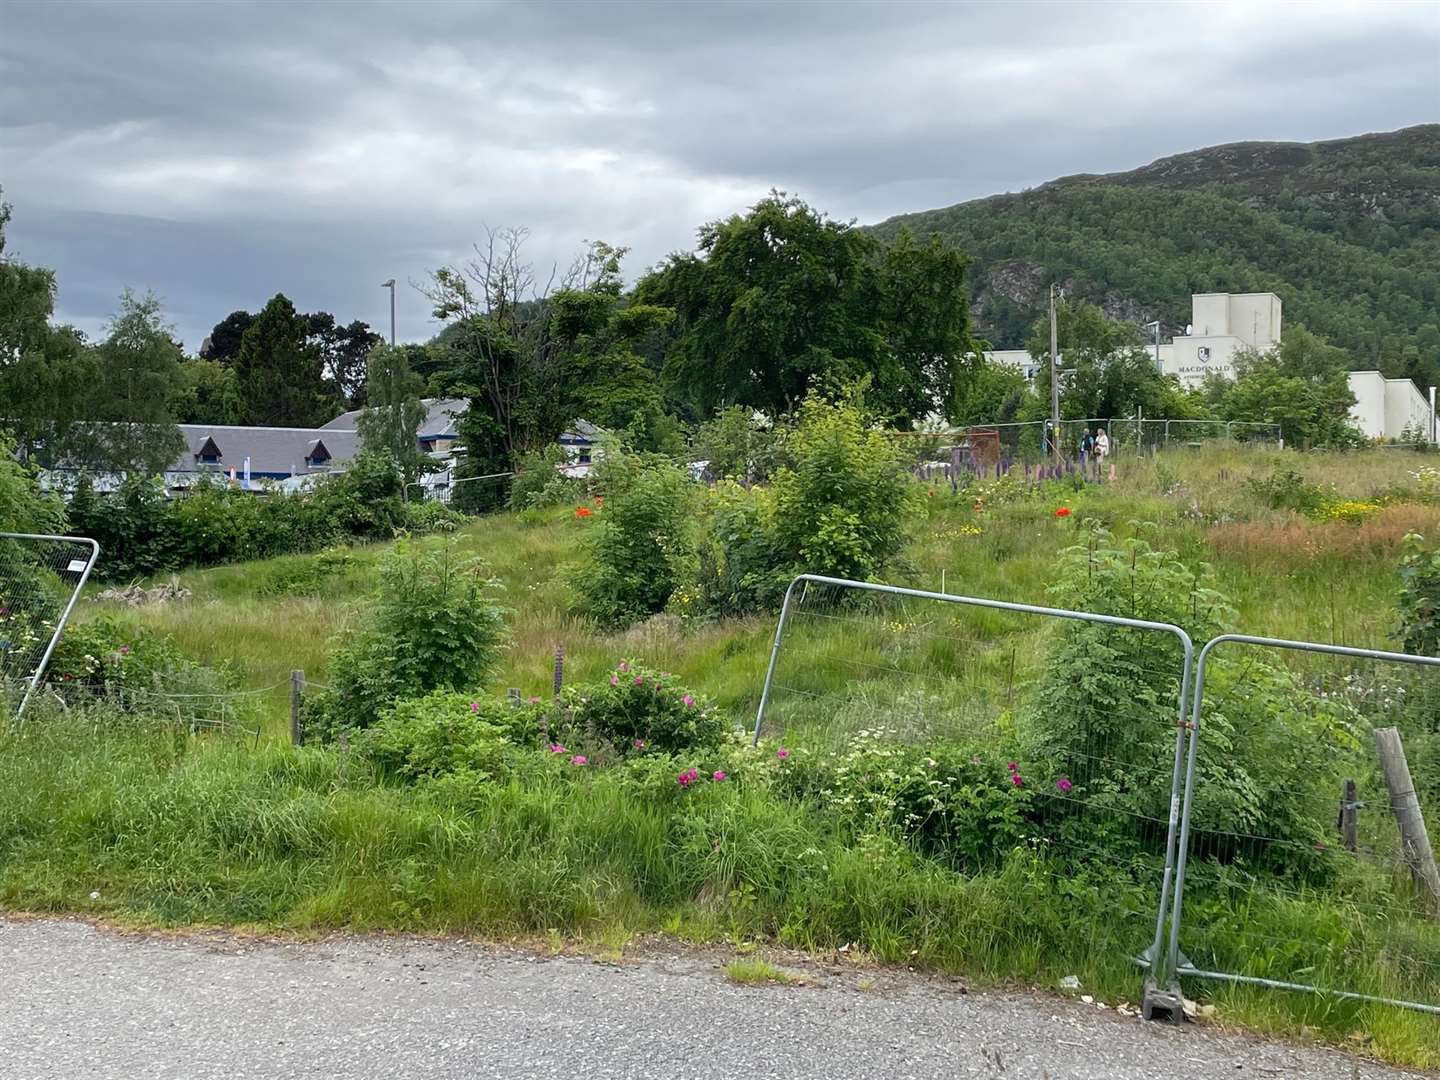 The site that has become an eyesore in central Aviemore.